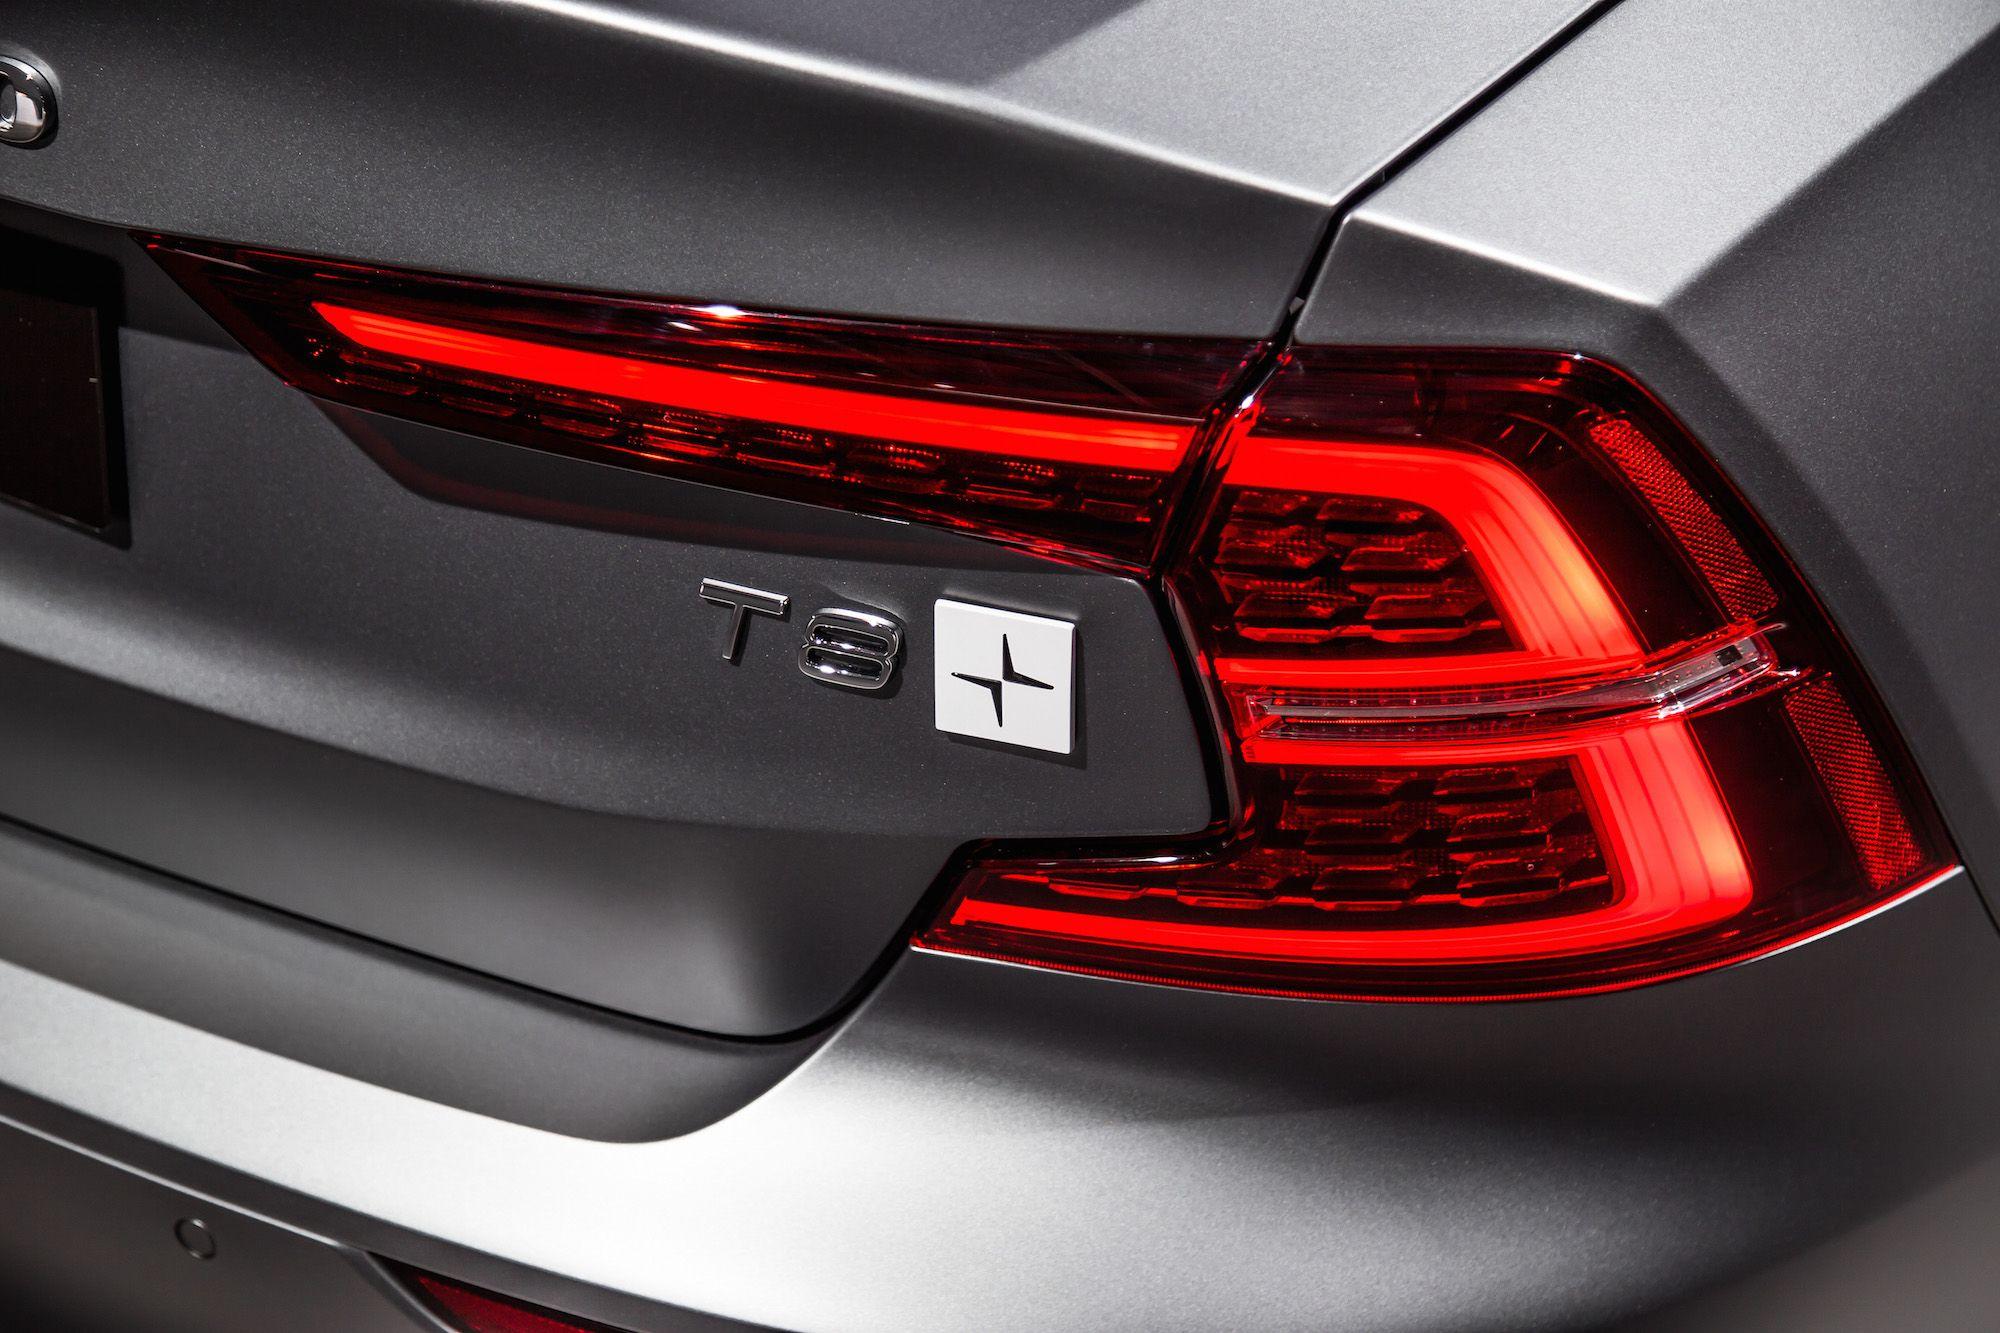 2019 Volvo Logo - First Look: 2019 Volvo S60